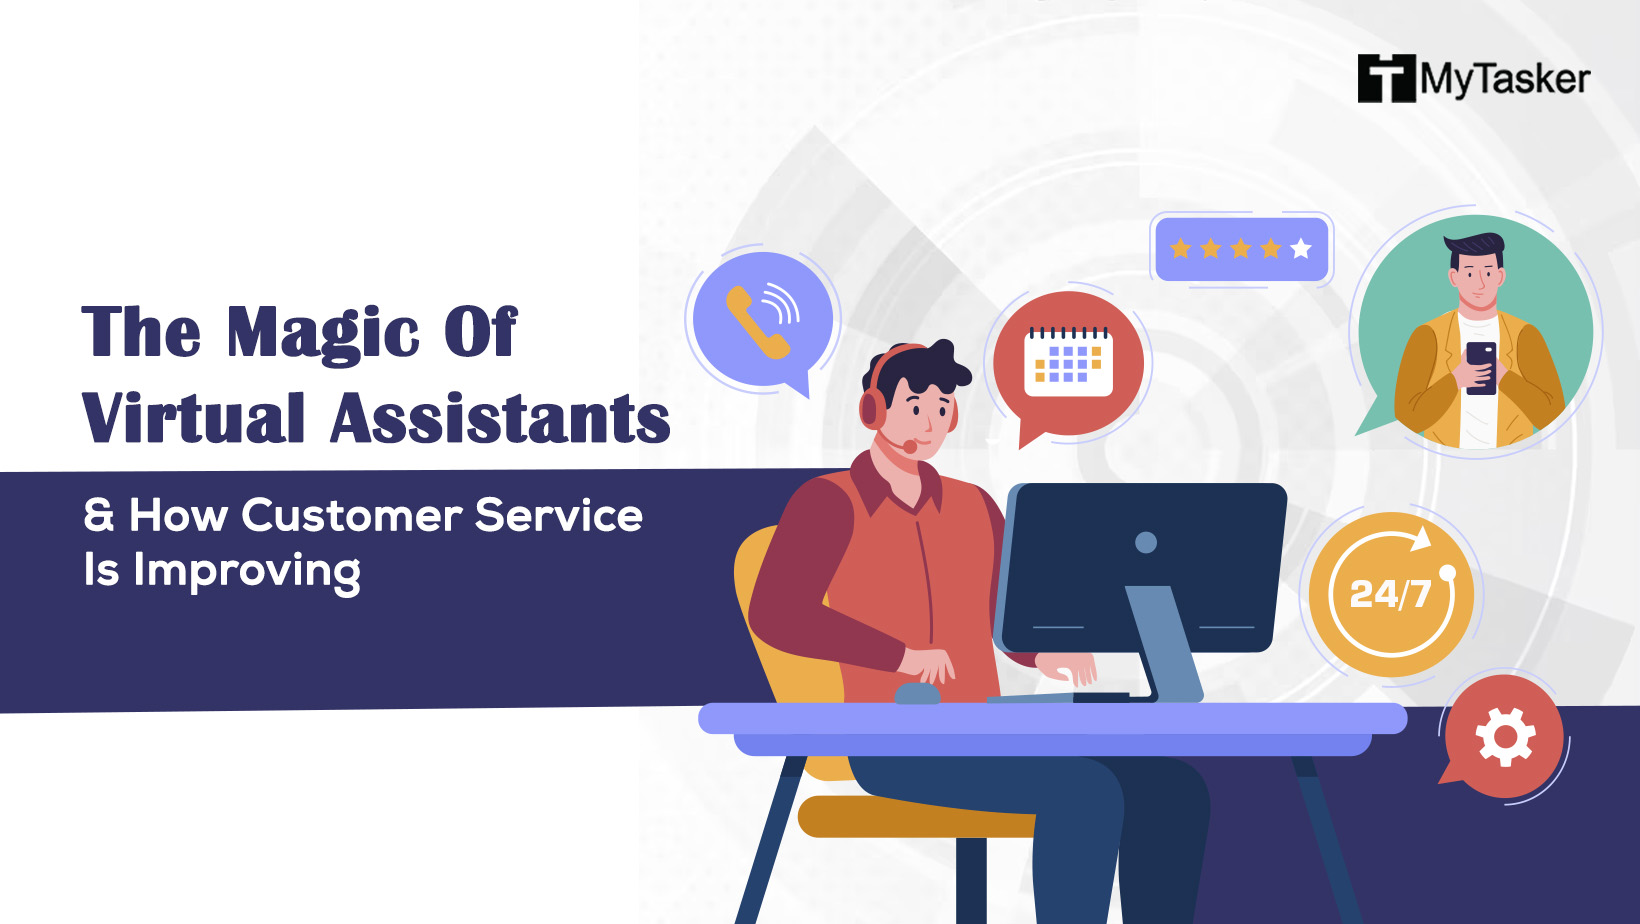 The Magic Of Virtual Assistants & How Customer Service Is Improving